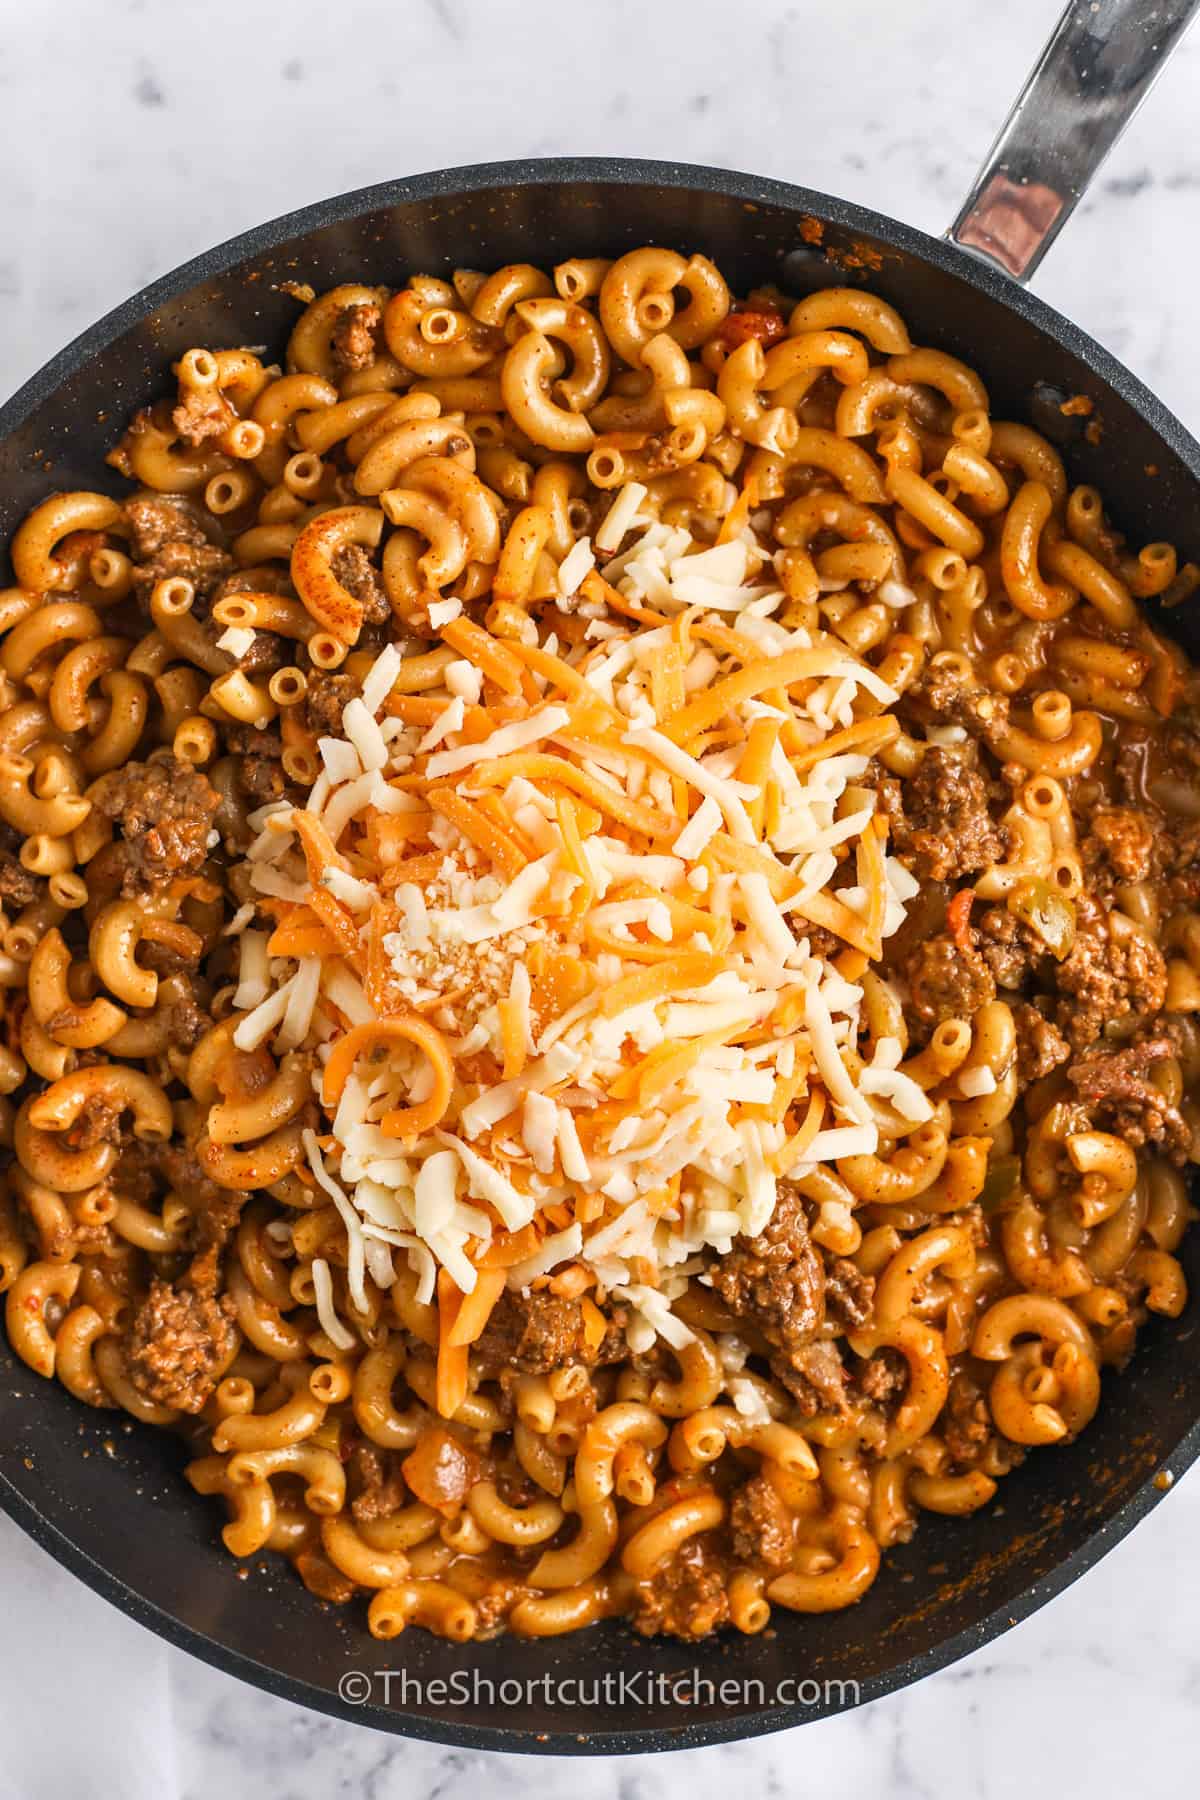 Cheese being added to the taco mac and cheese mixture in a frying pan